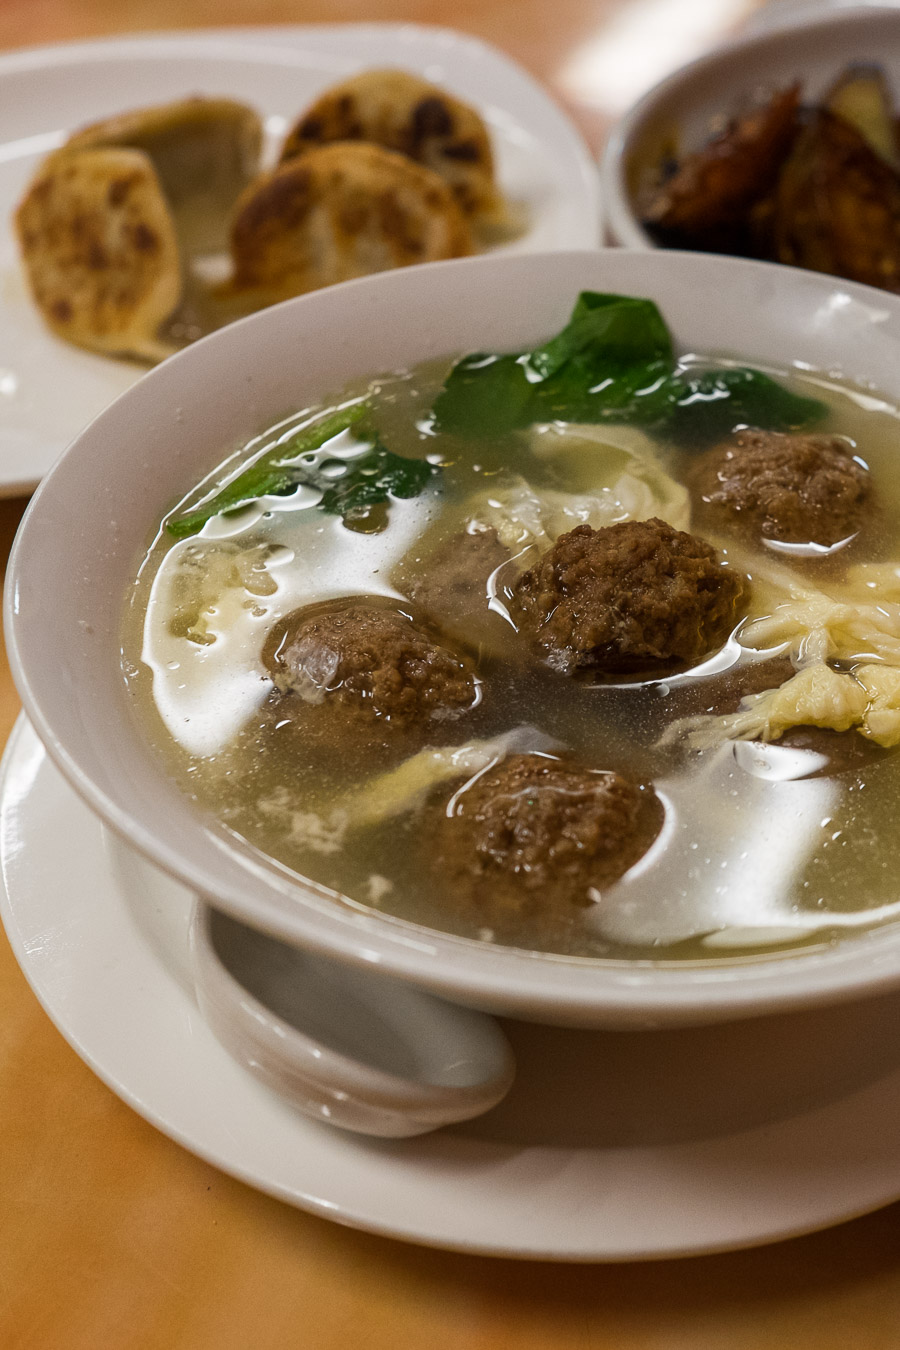 Spinach and meatball soup - as always!